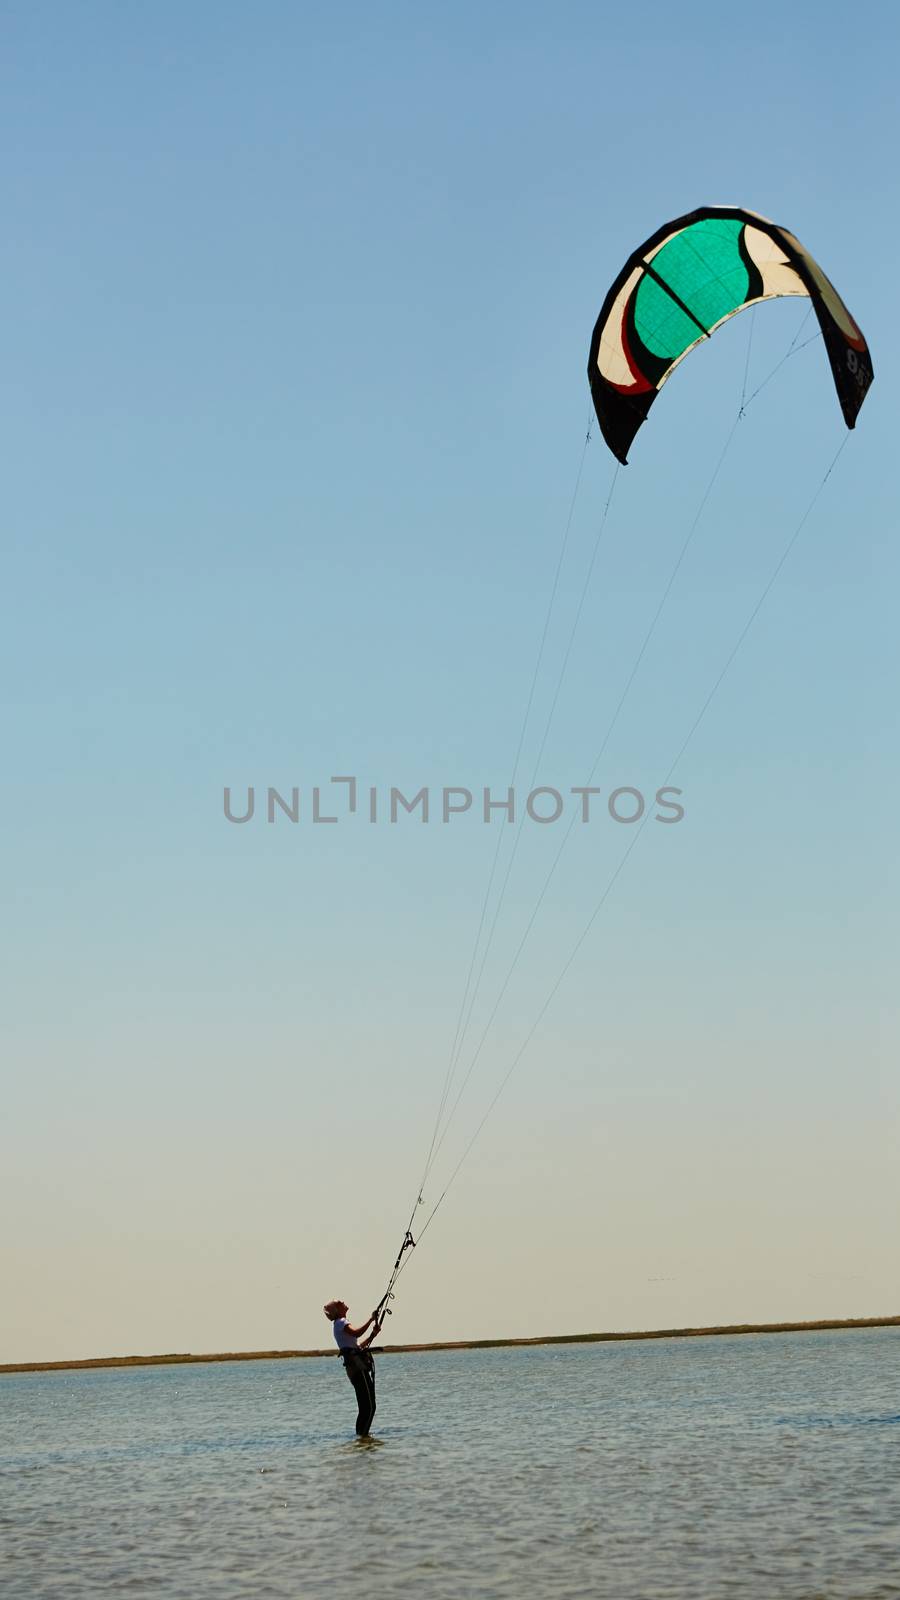 A young woman kite-surfer rides in summer day